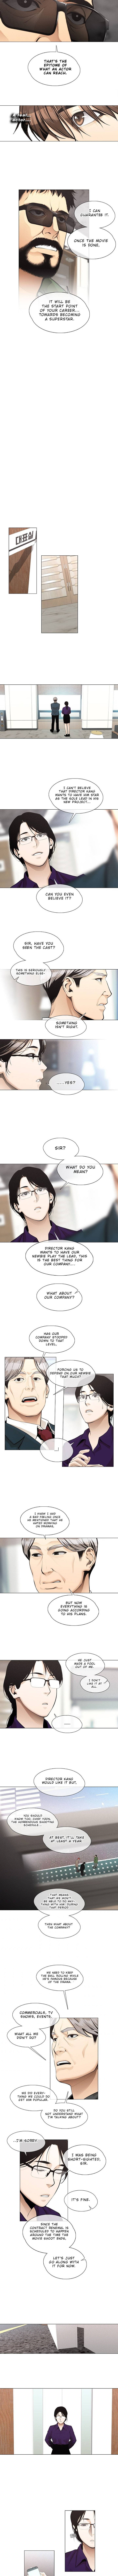 Movies Are Real - Page 2